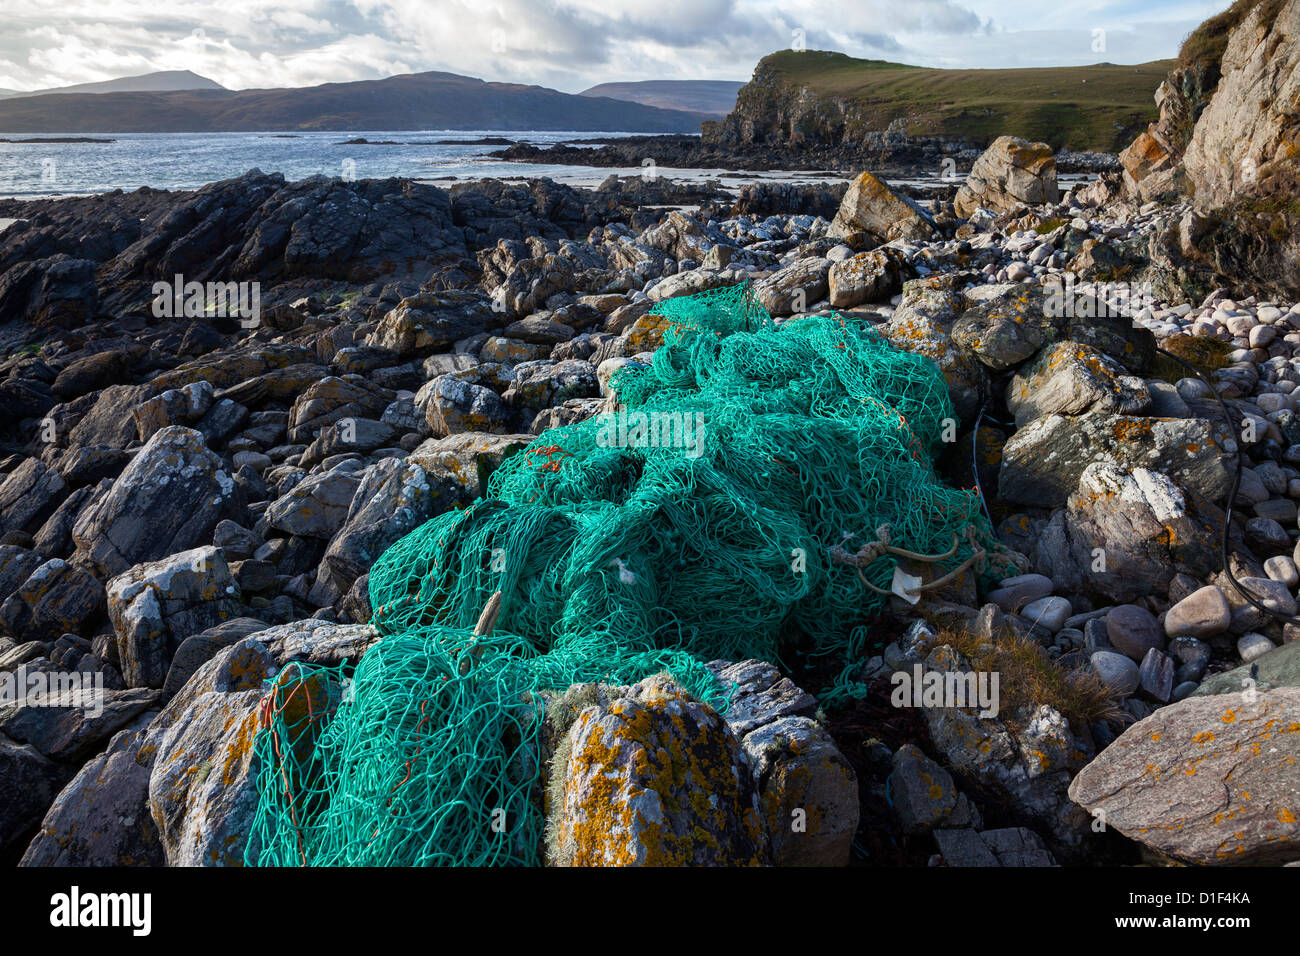 Green Fishing Net Washed up on the Beach of Balnakeil Bay with the